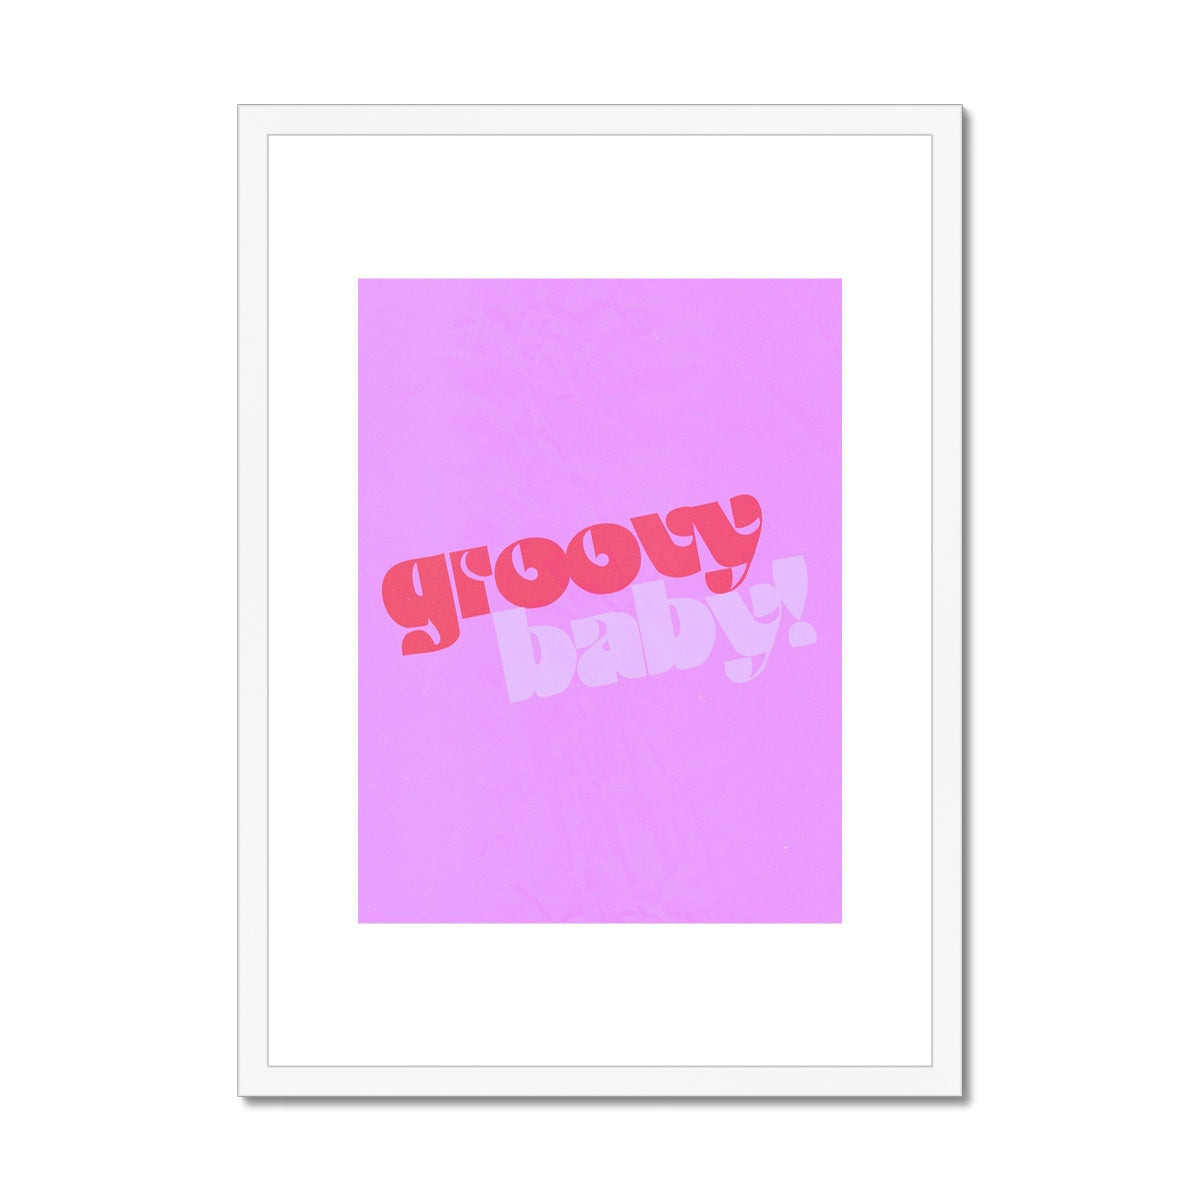 groovy baby Framed & Mounted Print